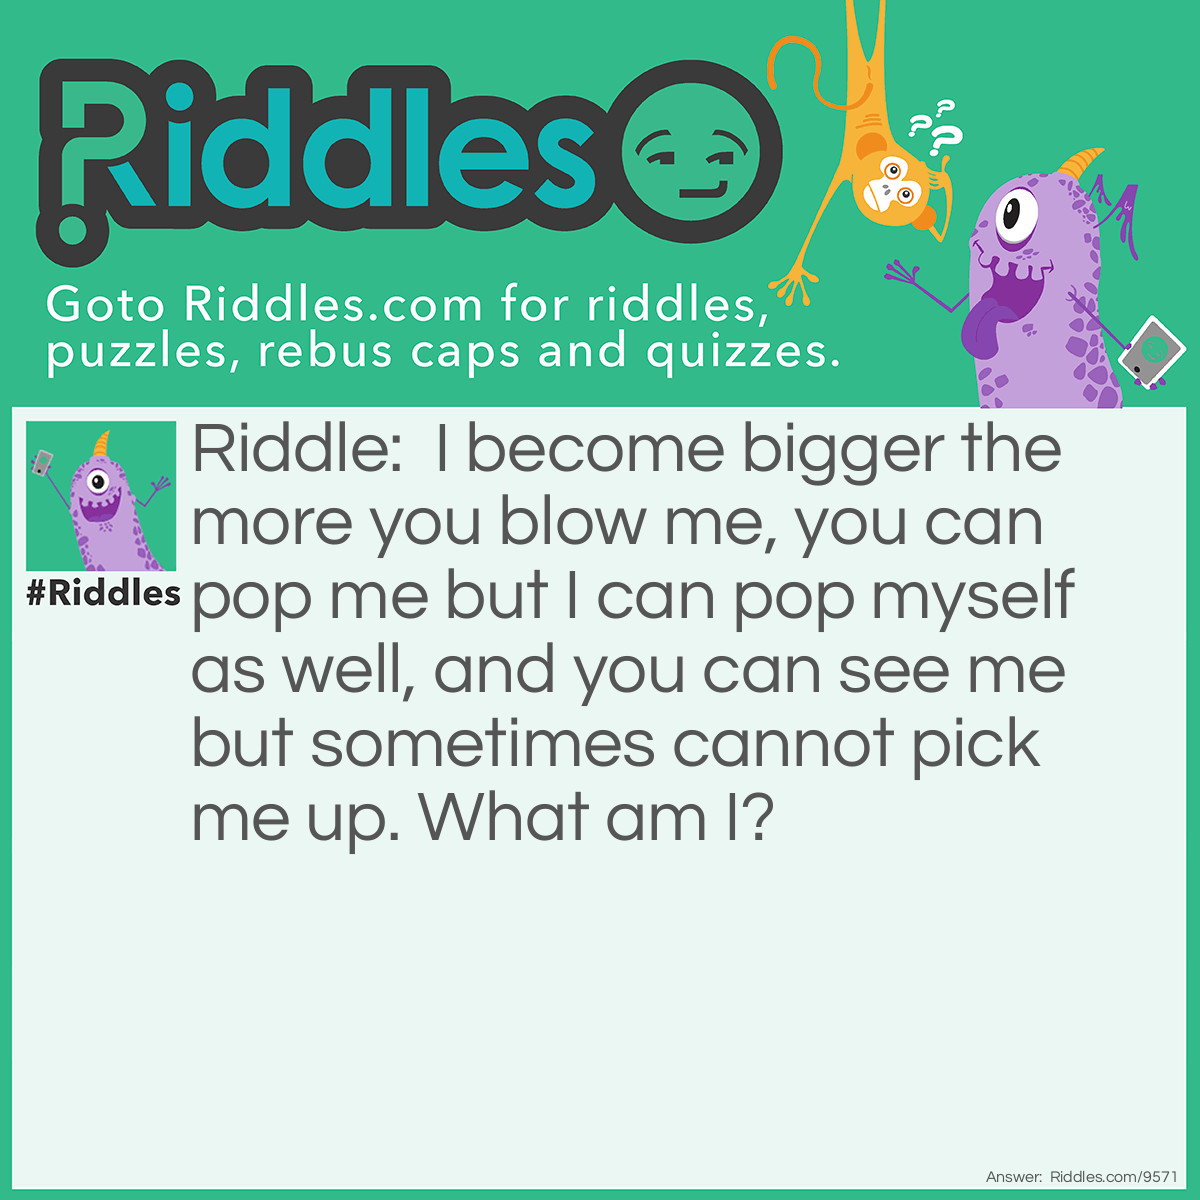 Riddle: I become bigger the more you blow me, you can pop me but I can pop myself as well, and you can see me but sometimes cannot pick me up. What am I? Answer: Bubbles.